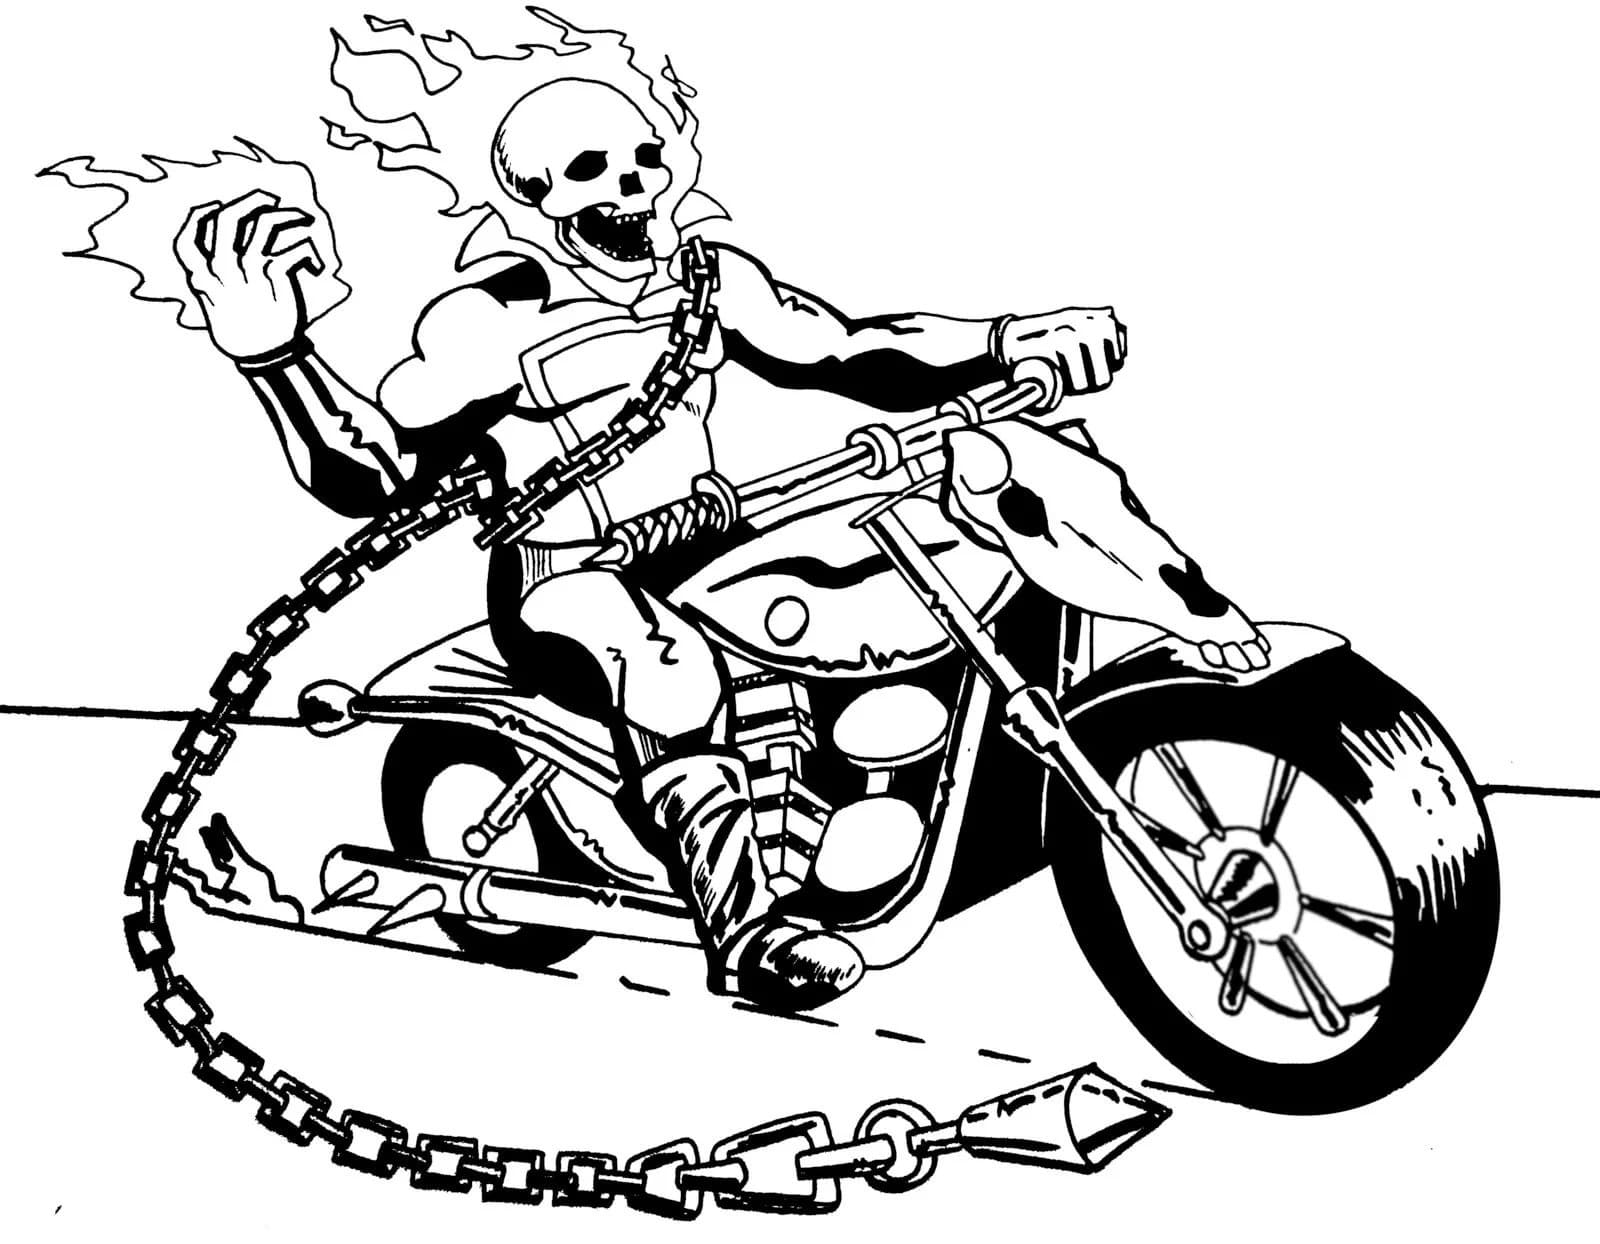 Download Motorcycle Coloring Pages For Kids. Free Printable